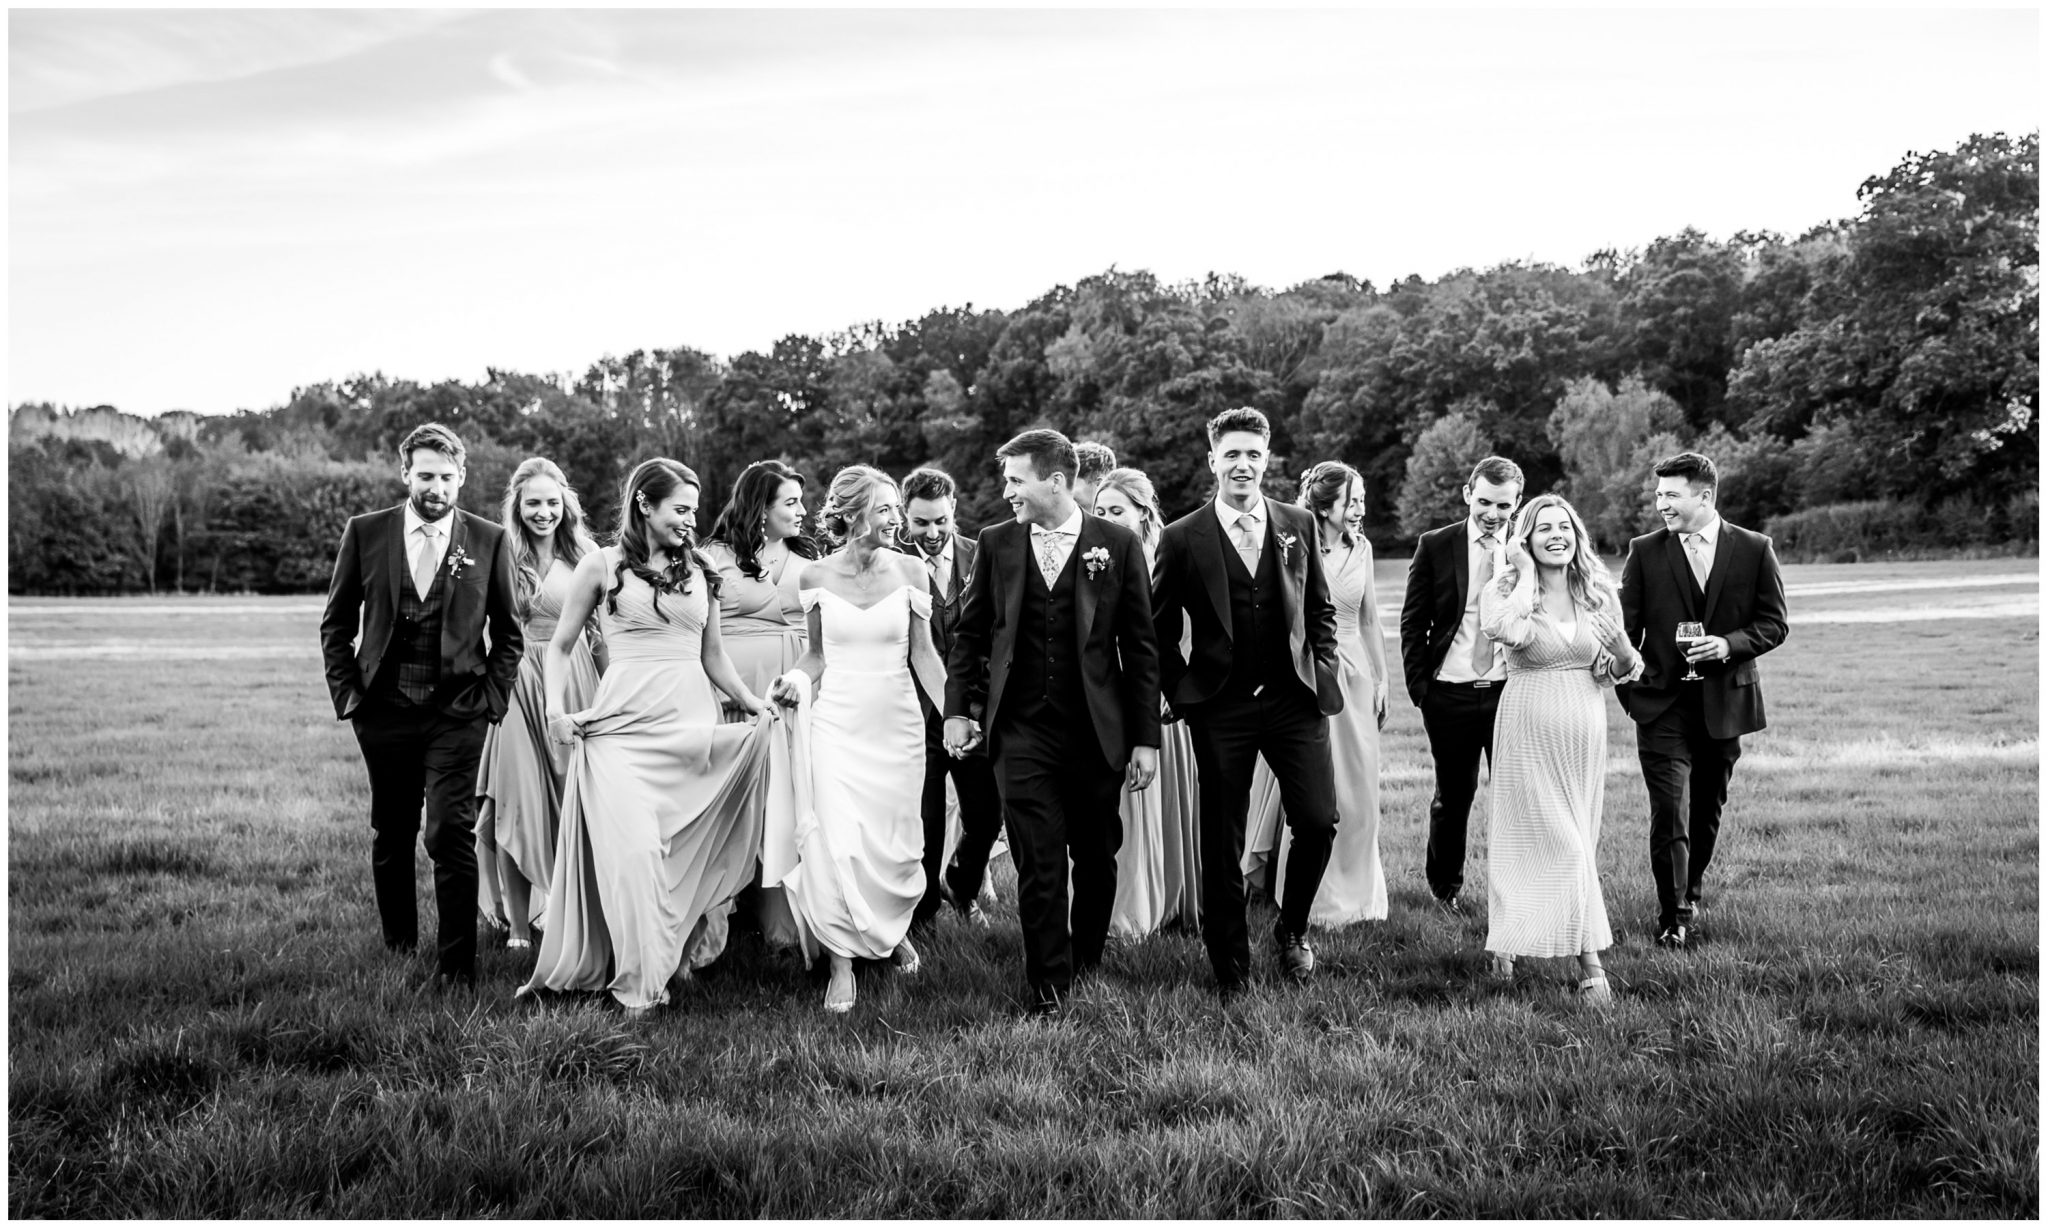 B;ack and whote candid photo of couple with wedding party in the grounds of the Holywell Estate